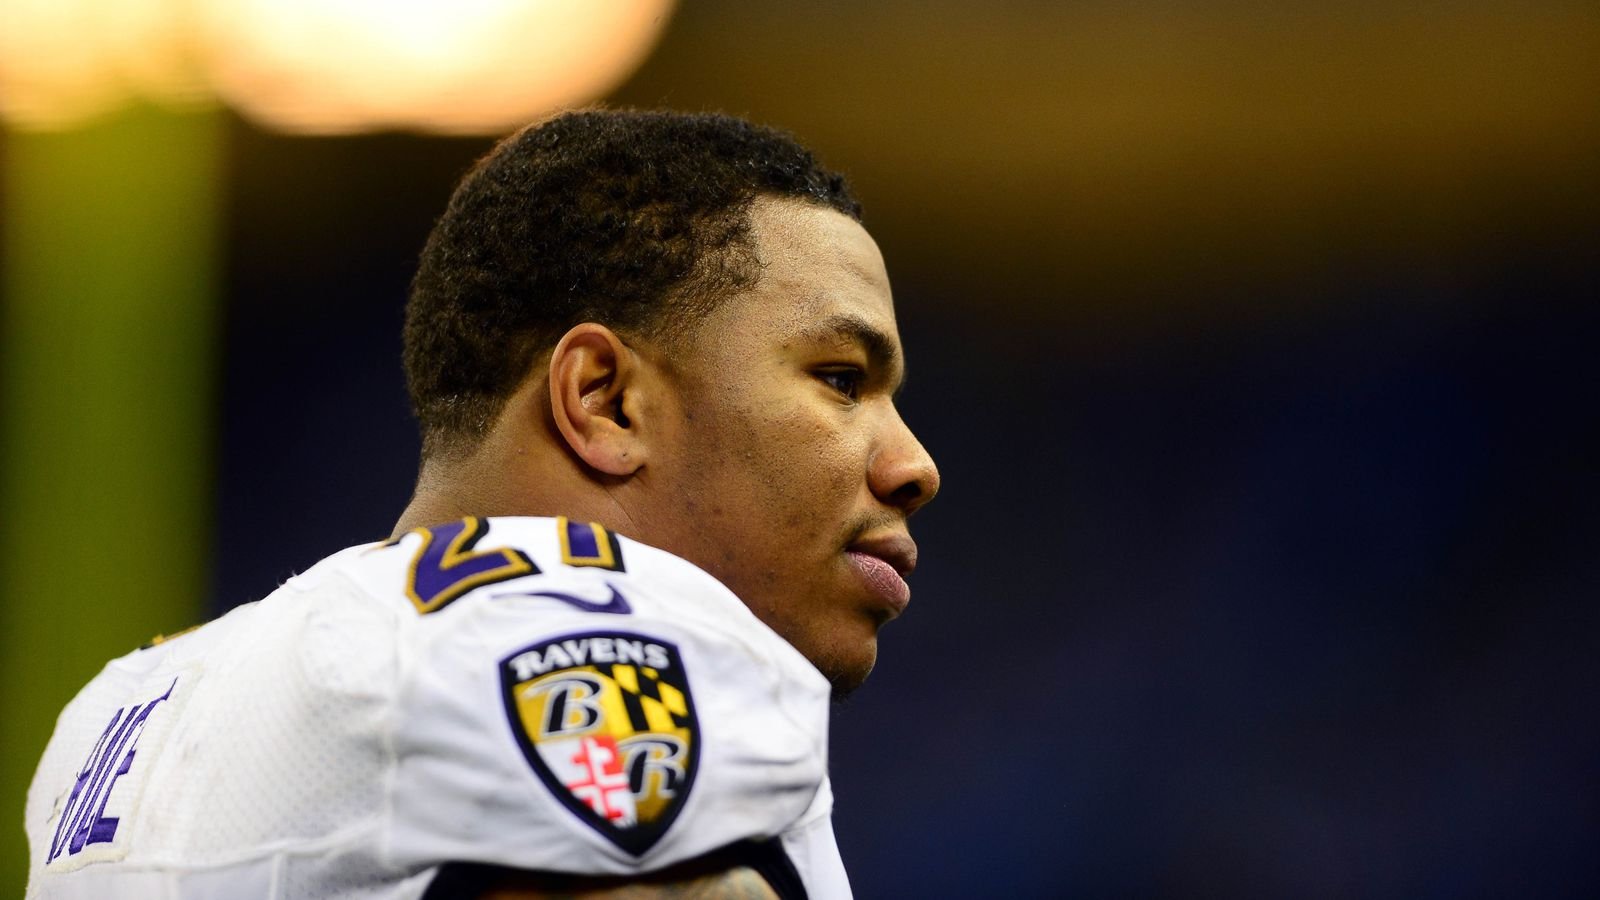 A complete timeline of the Ray Rice assault case